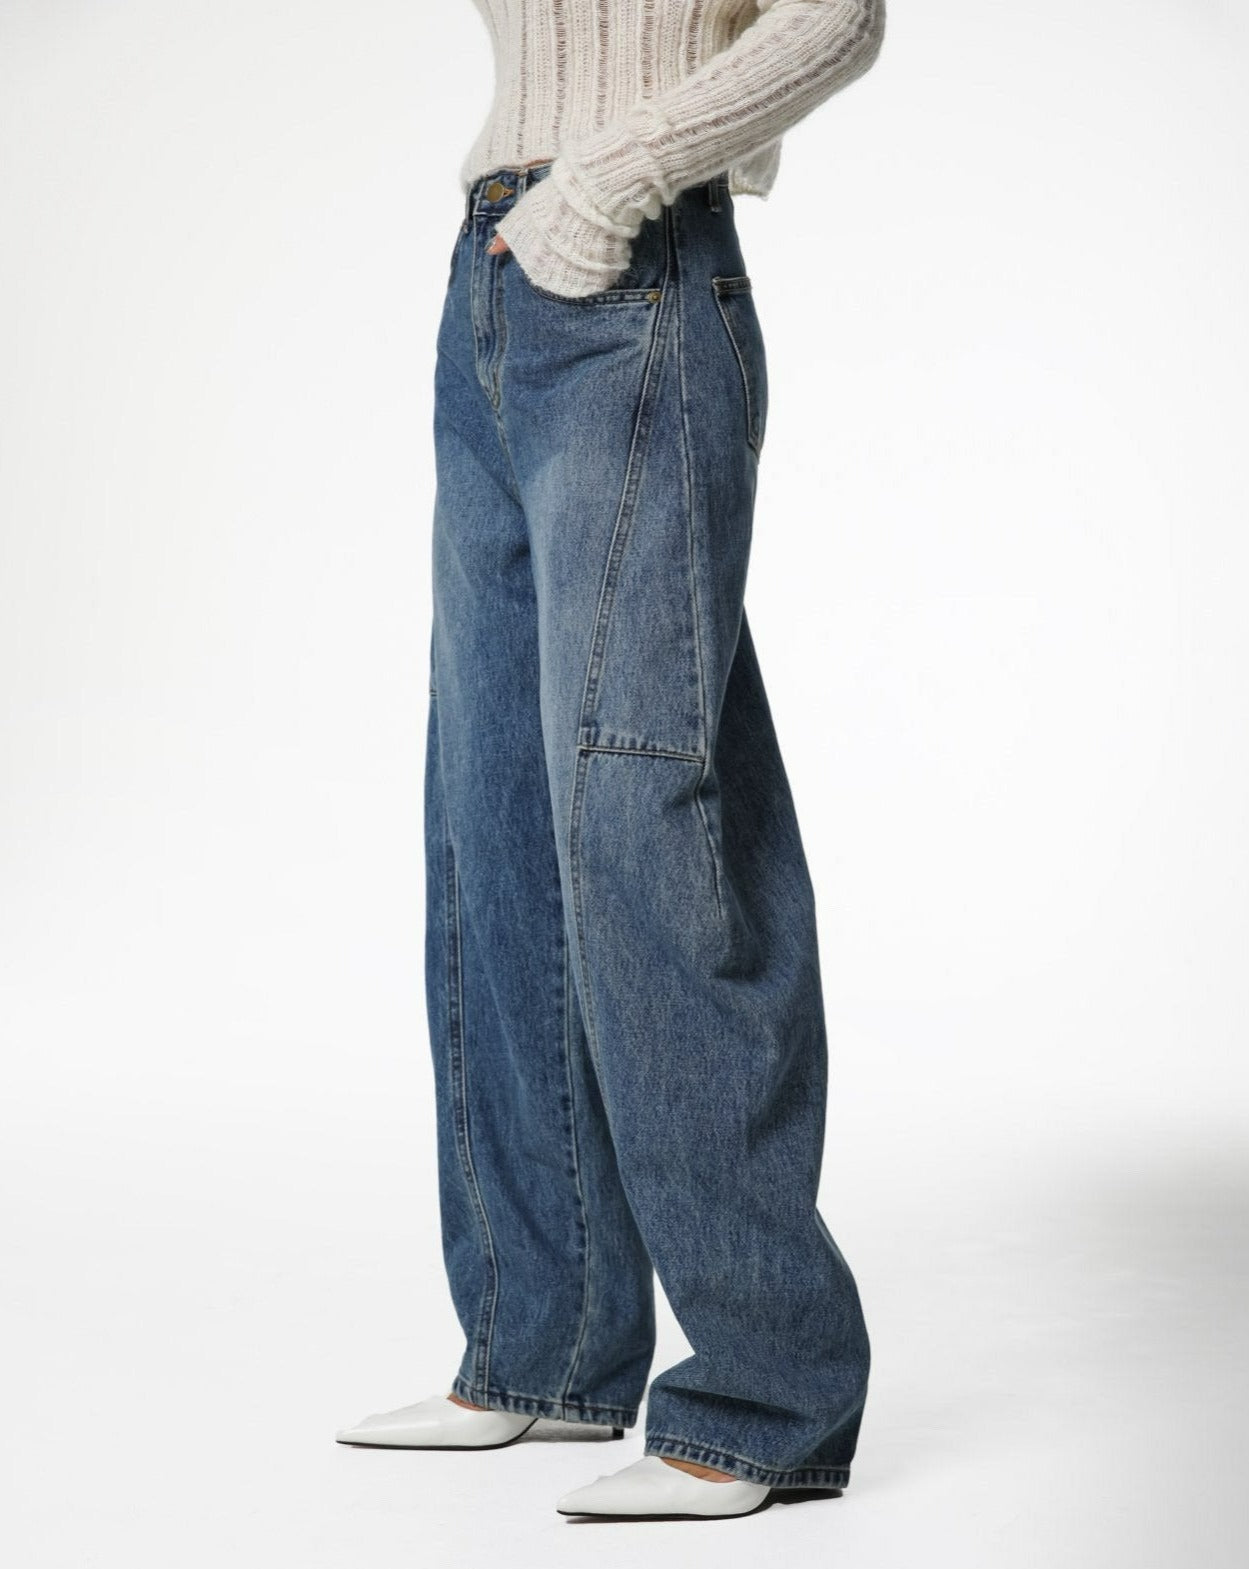 【PAPERMOON 페이퍼 문】AW / Side Stitch Detail Voulme Blue Denim Jeans